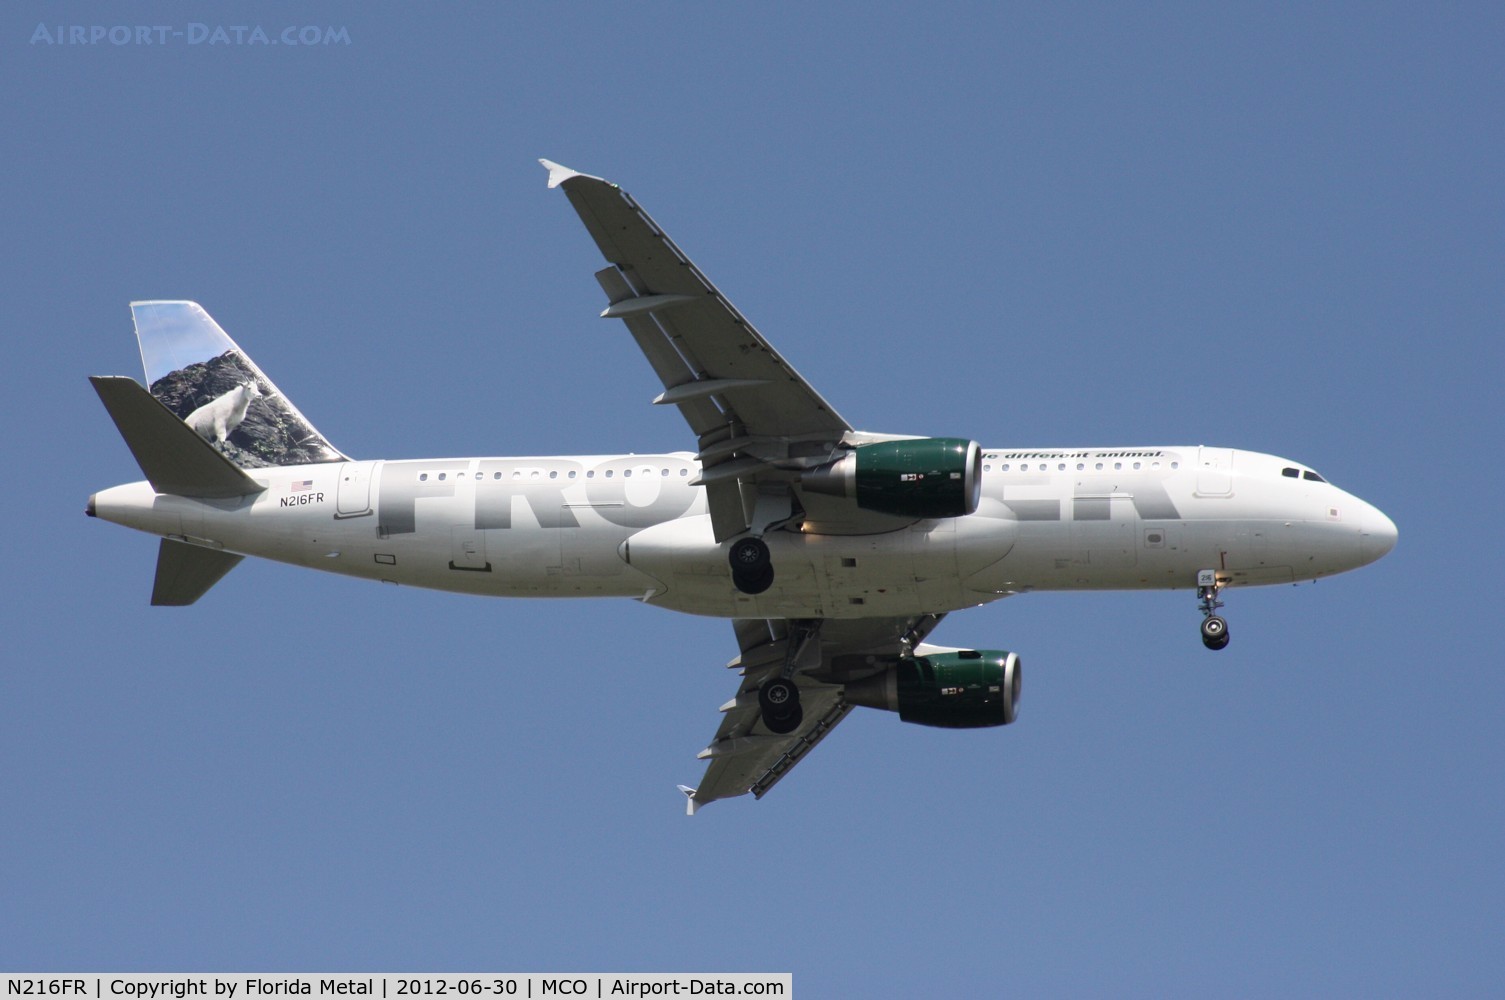 N216FR, 2011 Airbus A320-214 C/N 4745, Cliff the Mountain Goat A320 Frontier